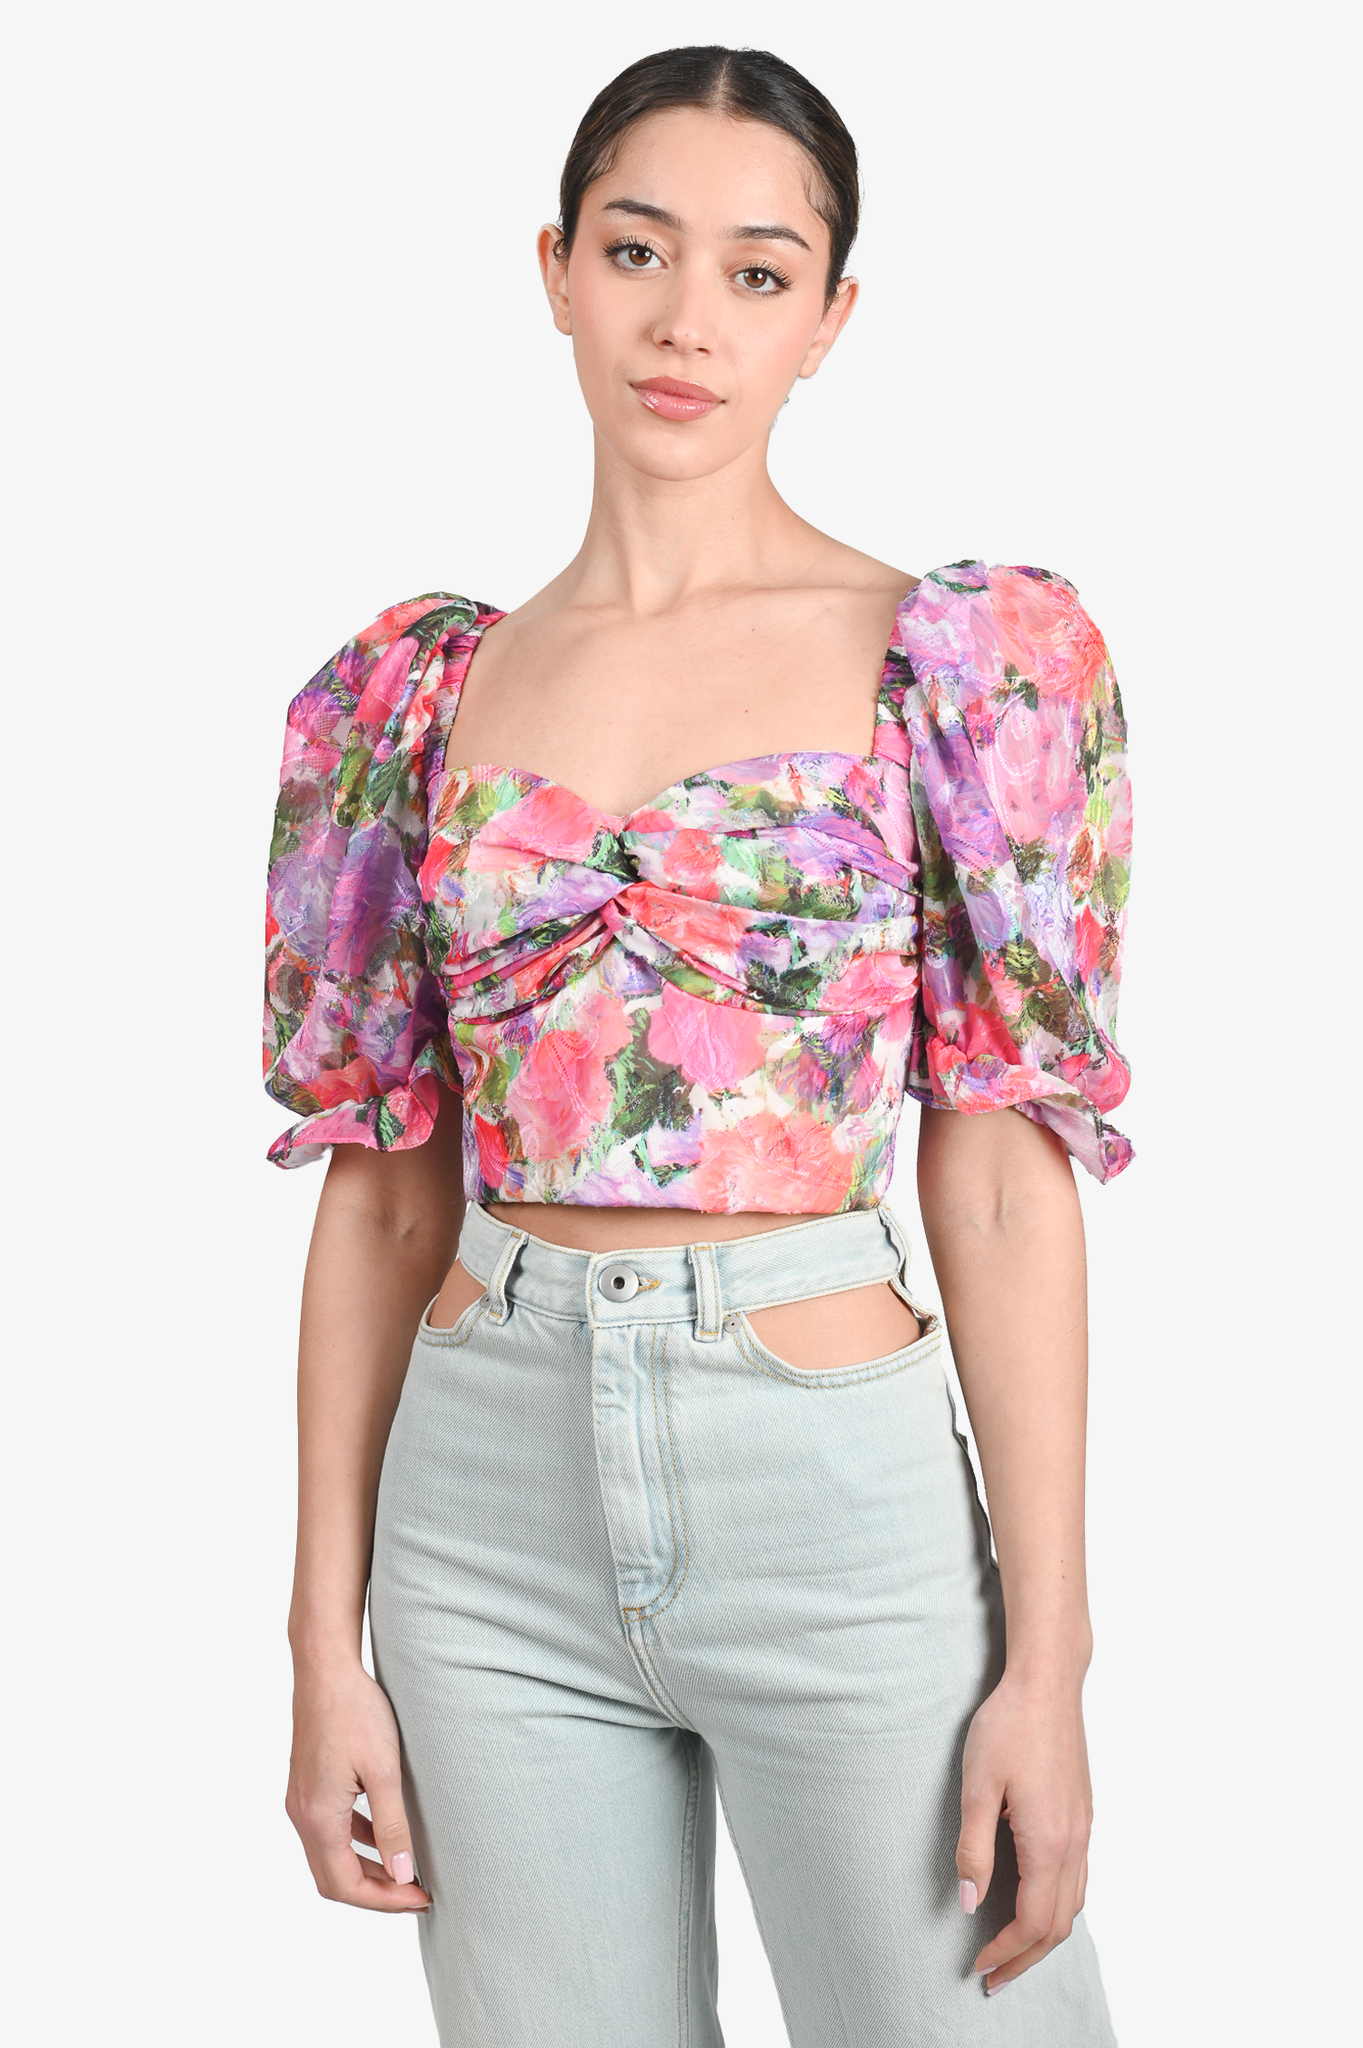 Patbo Pink/Purple Floral Puff Sleeve Cropped Top Size 4 US